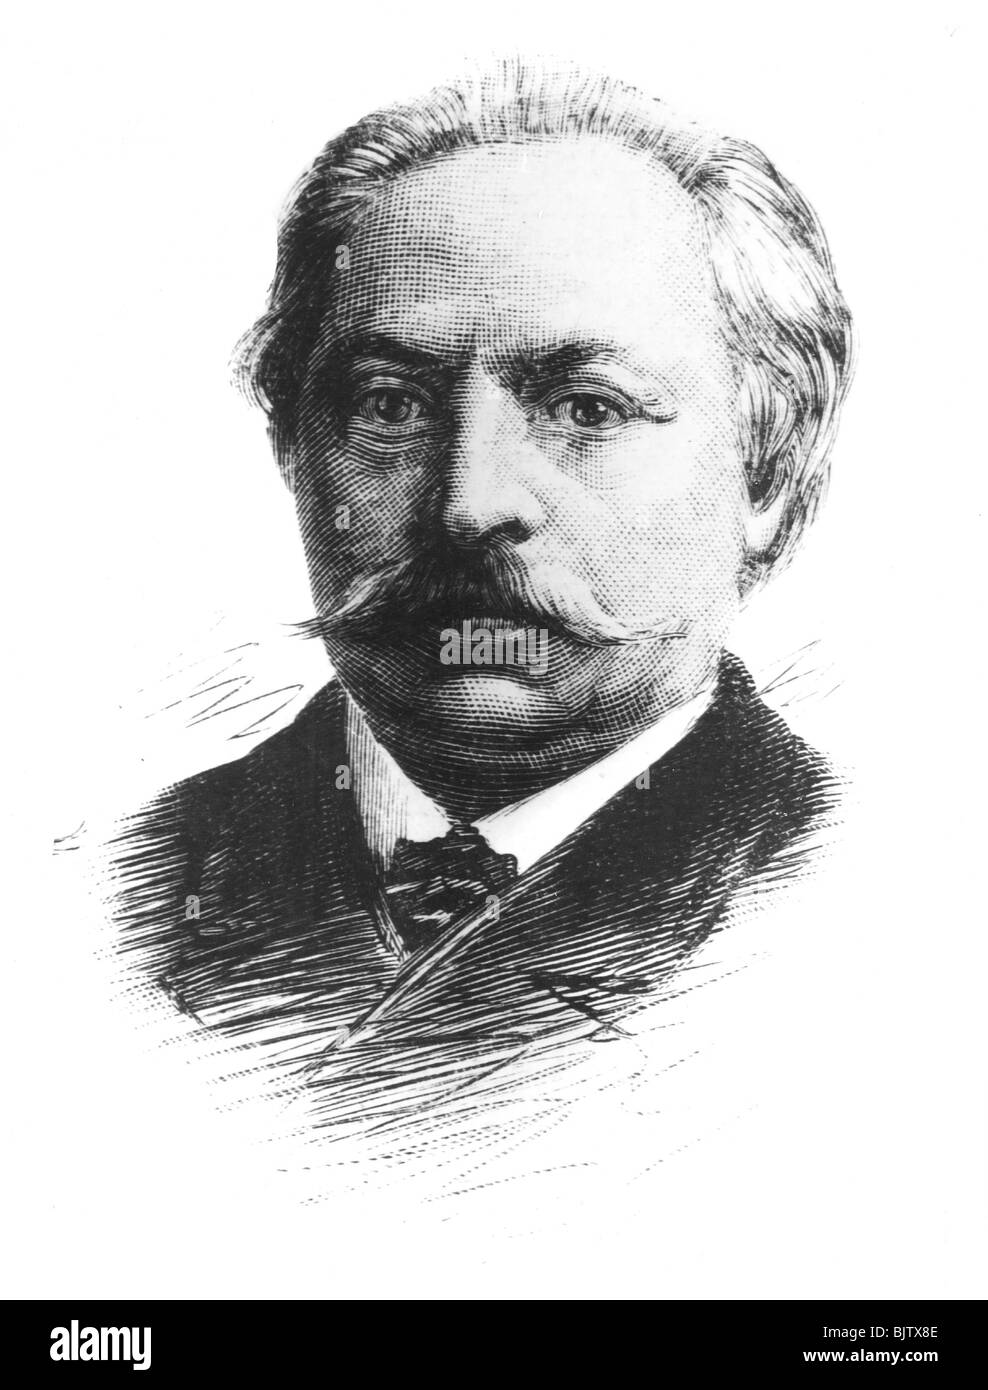 Goldmark, Karl, 18.5.1830 - 2.1.1915, Austrian composer, portrait, wood engraving after drawing by F. Waibler, before 1891, after photo, Stock Photo